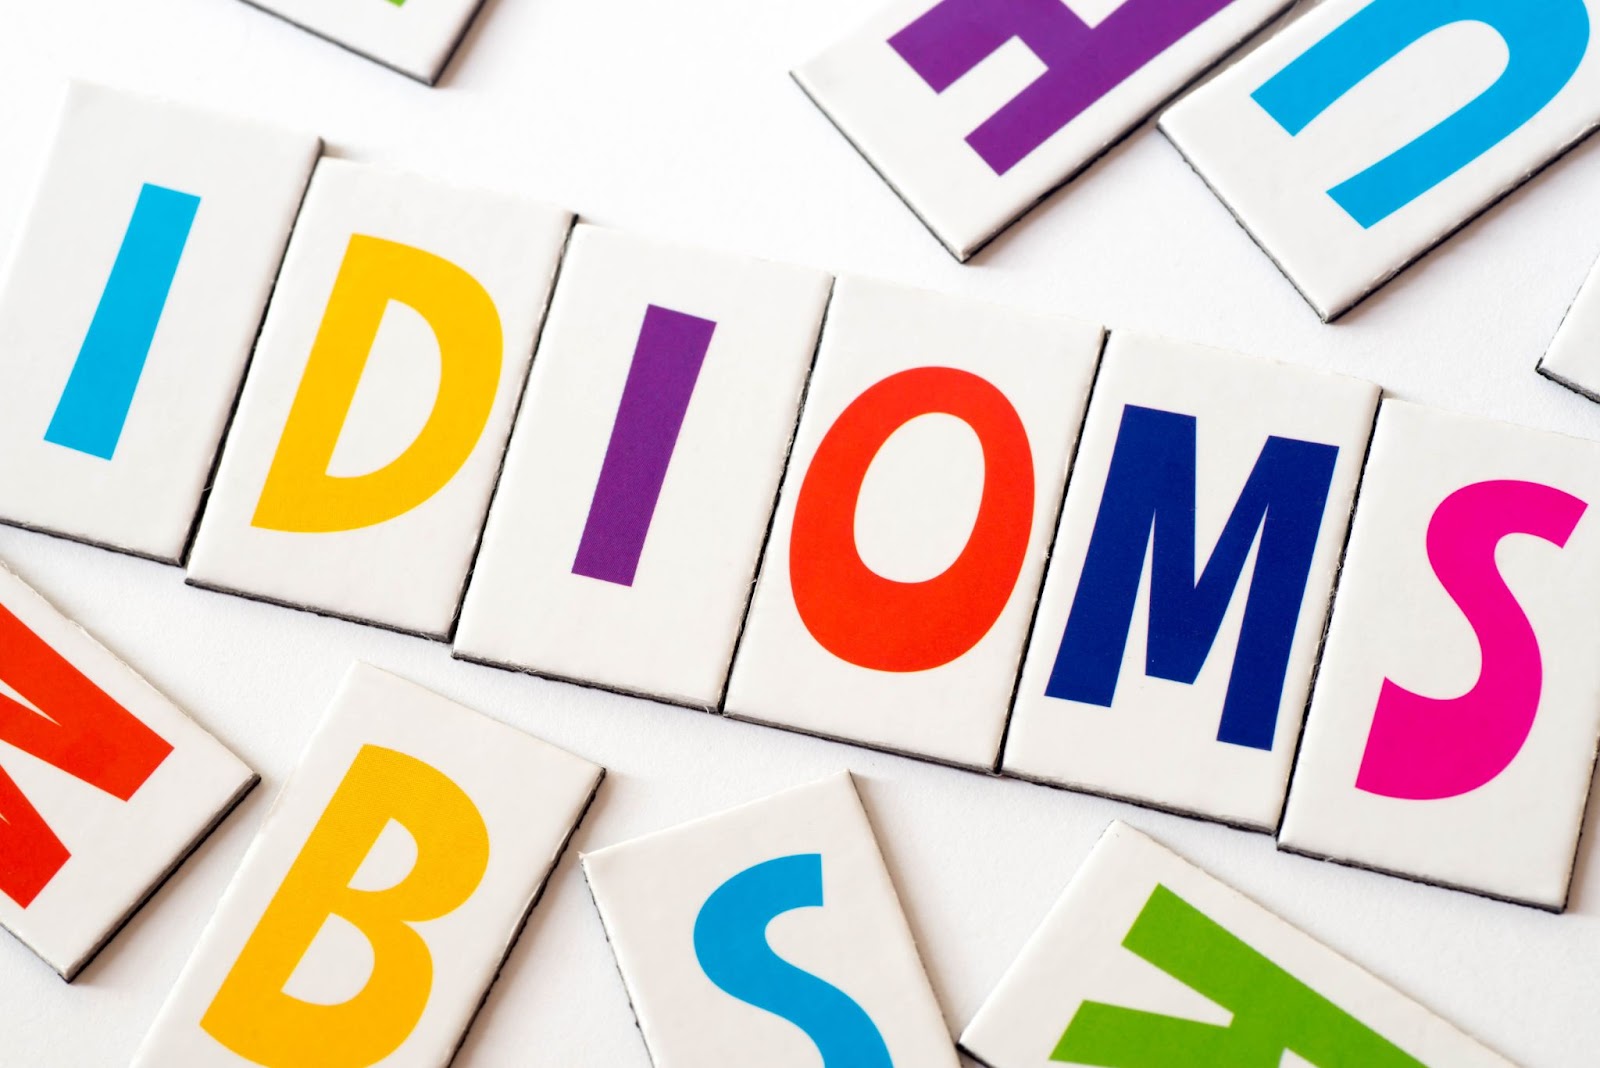 Idiomatic Expressions: What Are They & Why Are They Important?